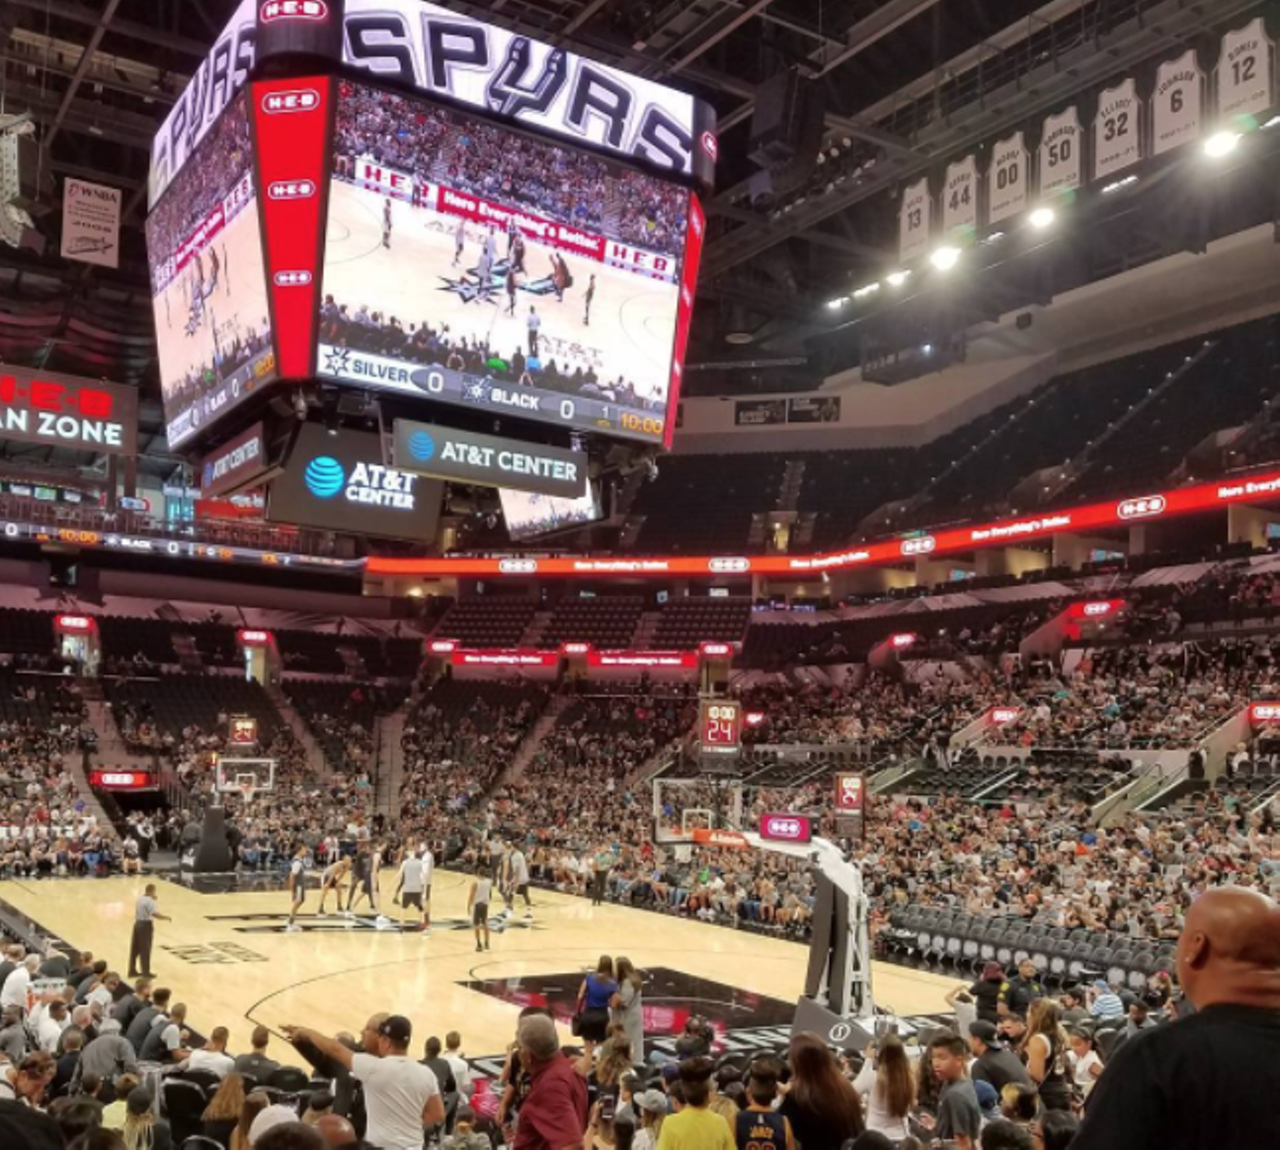 Cheer on the Spurs at the AT&T Center
1 AT&T Center Pkwy., (210) 444-5000, attcenter.com
You waited all summer for some basketball action, and now it’s here. Snag up some tickets early in the season while they’re still reasonable. You’ll be checking this off from your fall bucket list while fulfilling your duty as a San Antonian.
Photo via Instagram, bradley20163